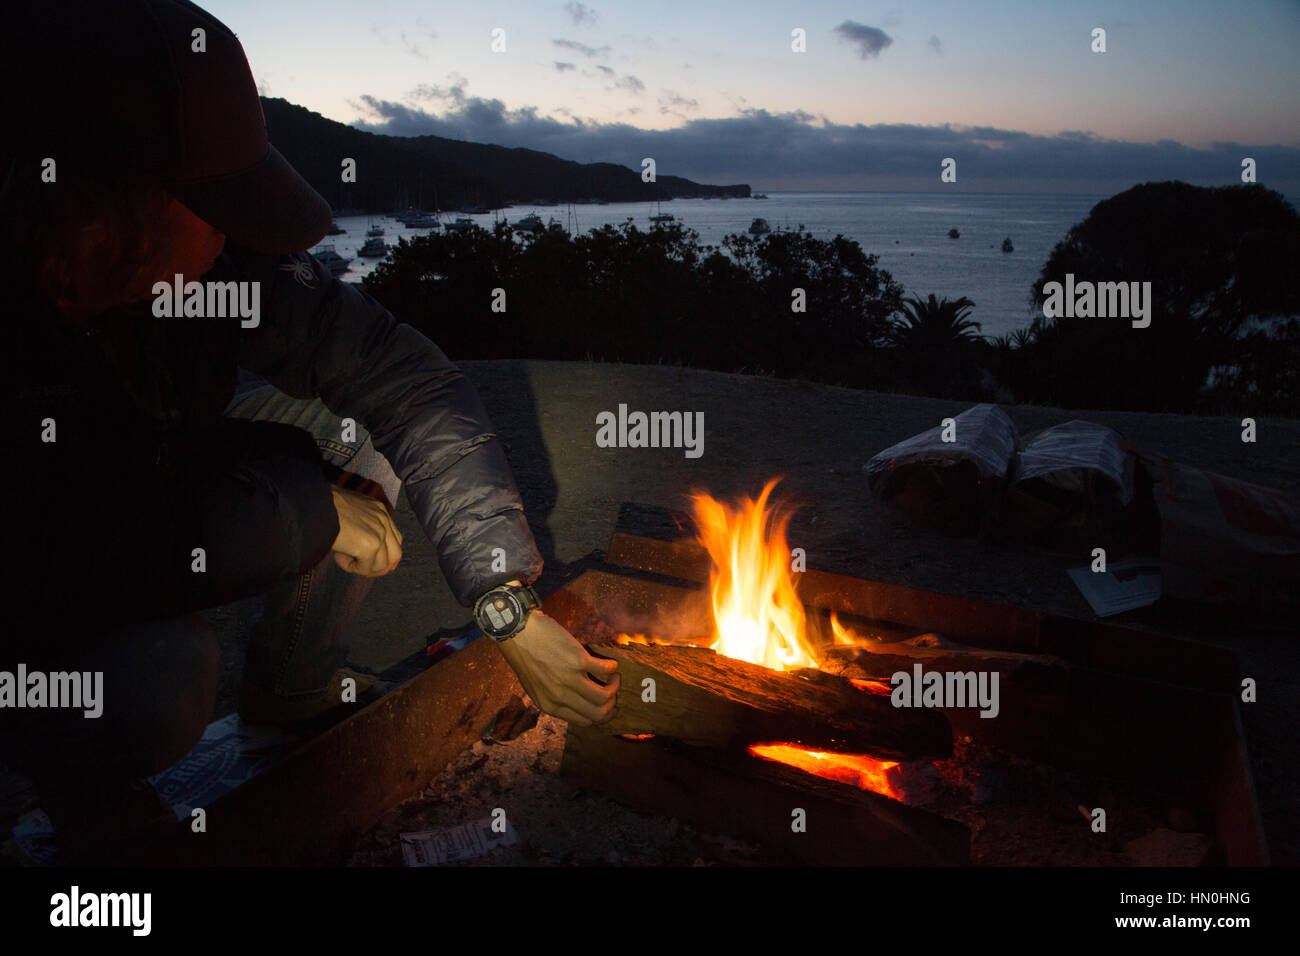 A man tends to a campfire at a site overlooking Two Harbors, Catalina Island. Stock Photo